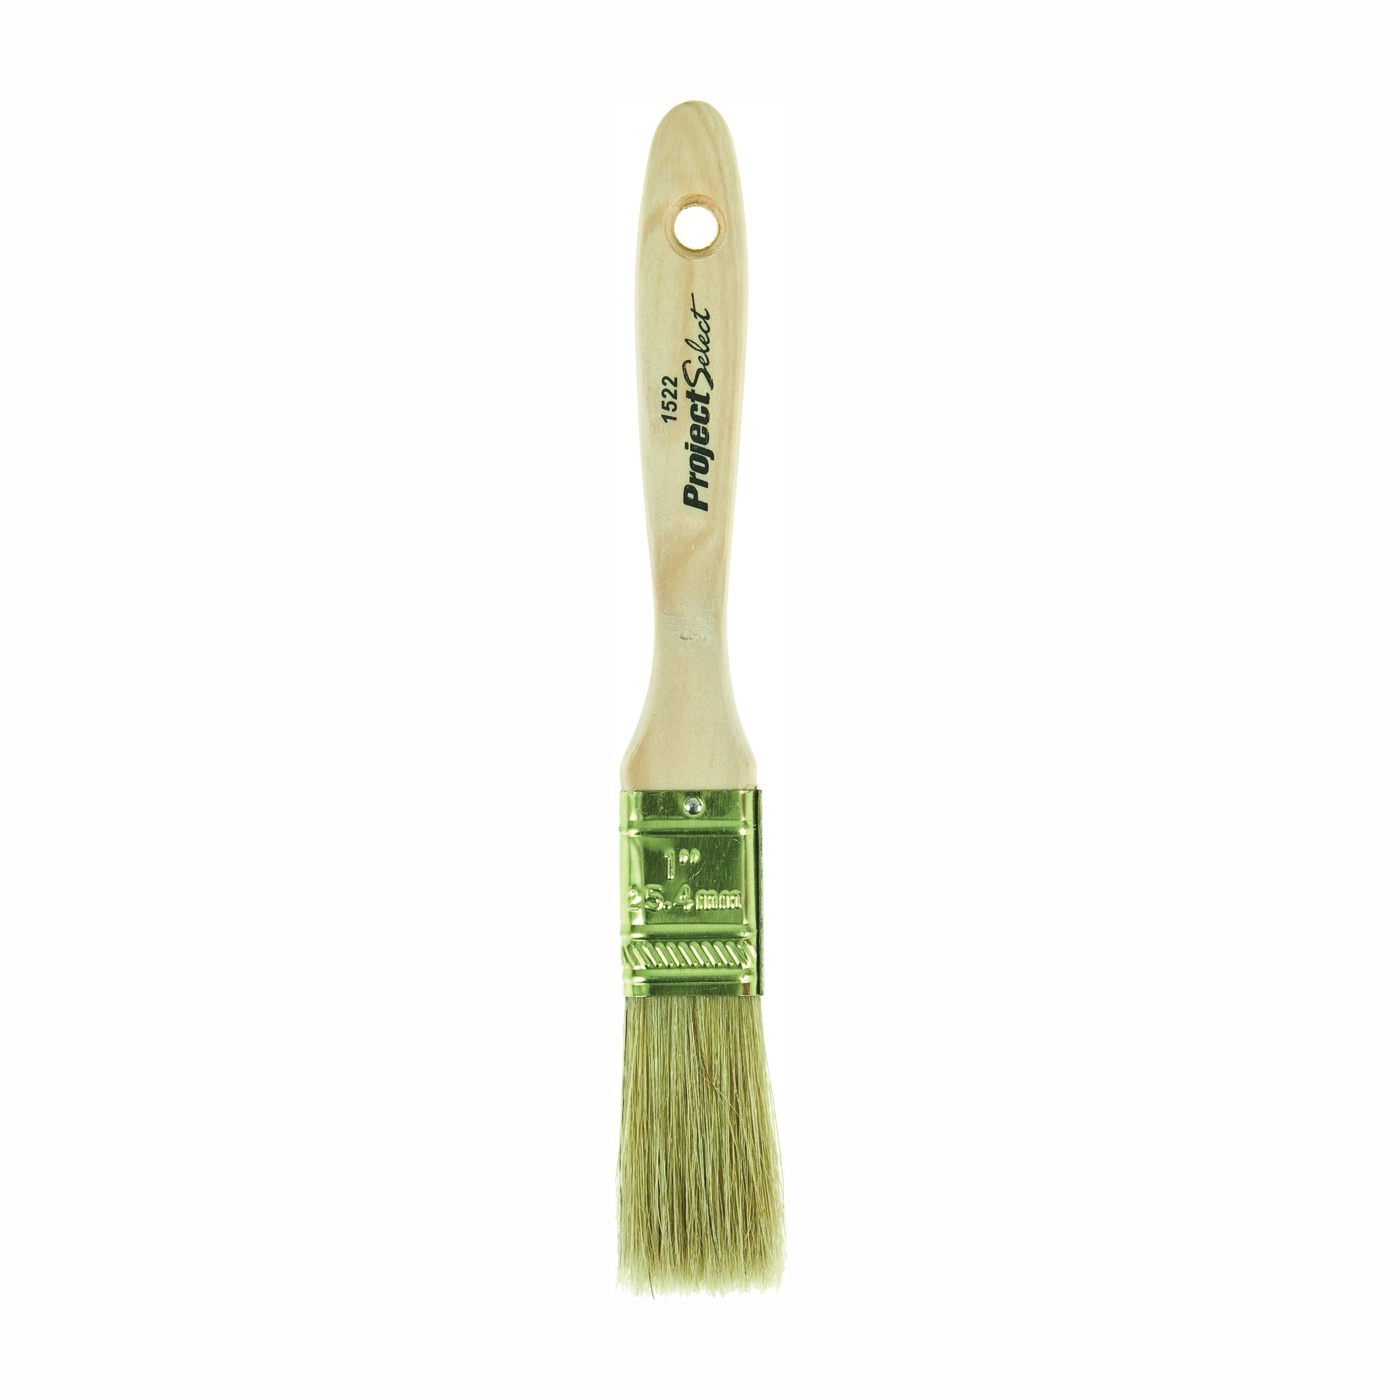 Linzer 1522-2 Paint Brush, 2 in W, 2-3/4 in L Bristle, China Bristle, Beaver Tail Handle